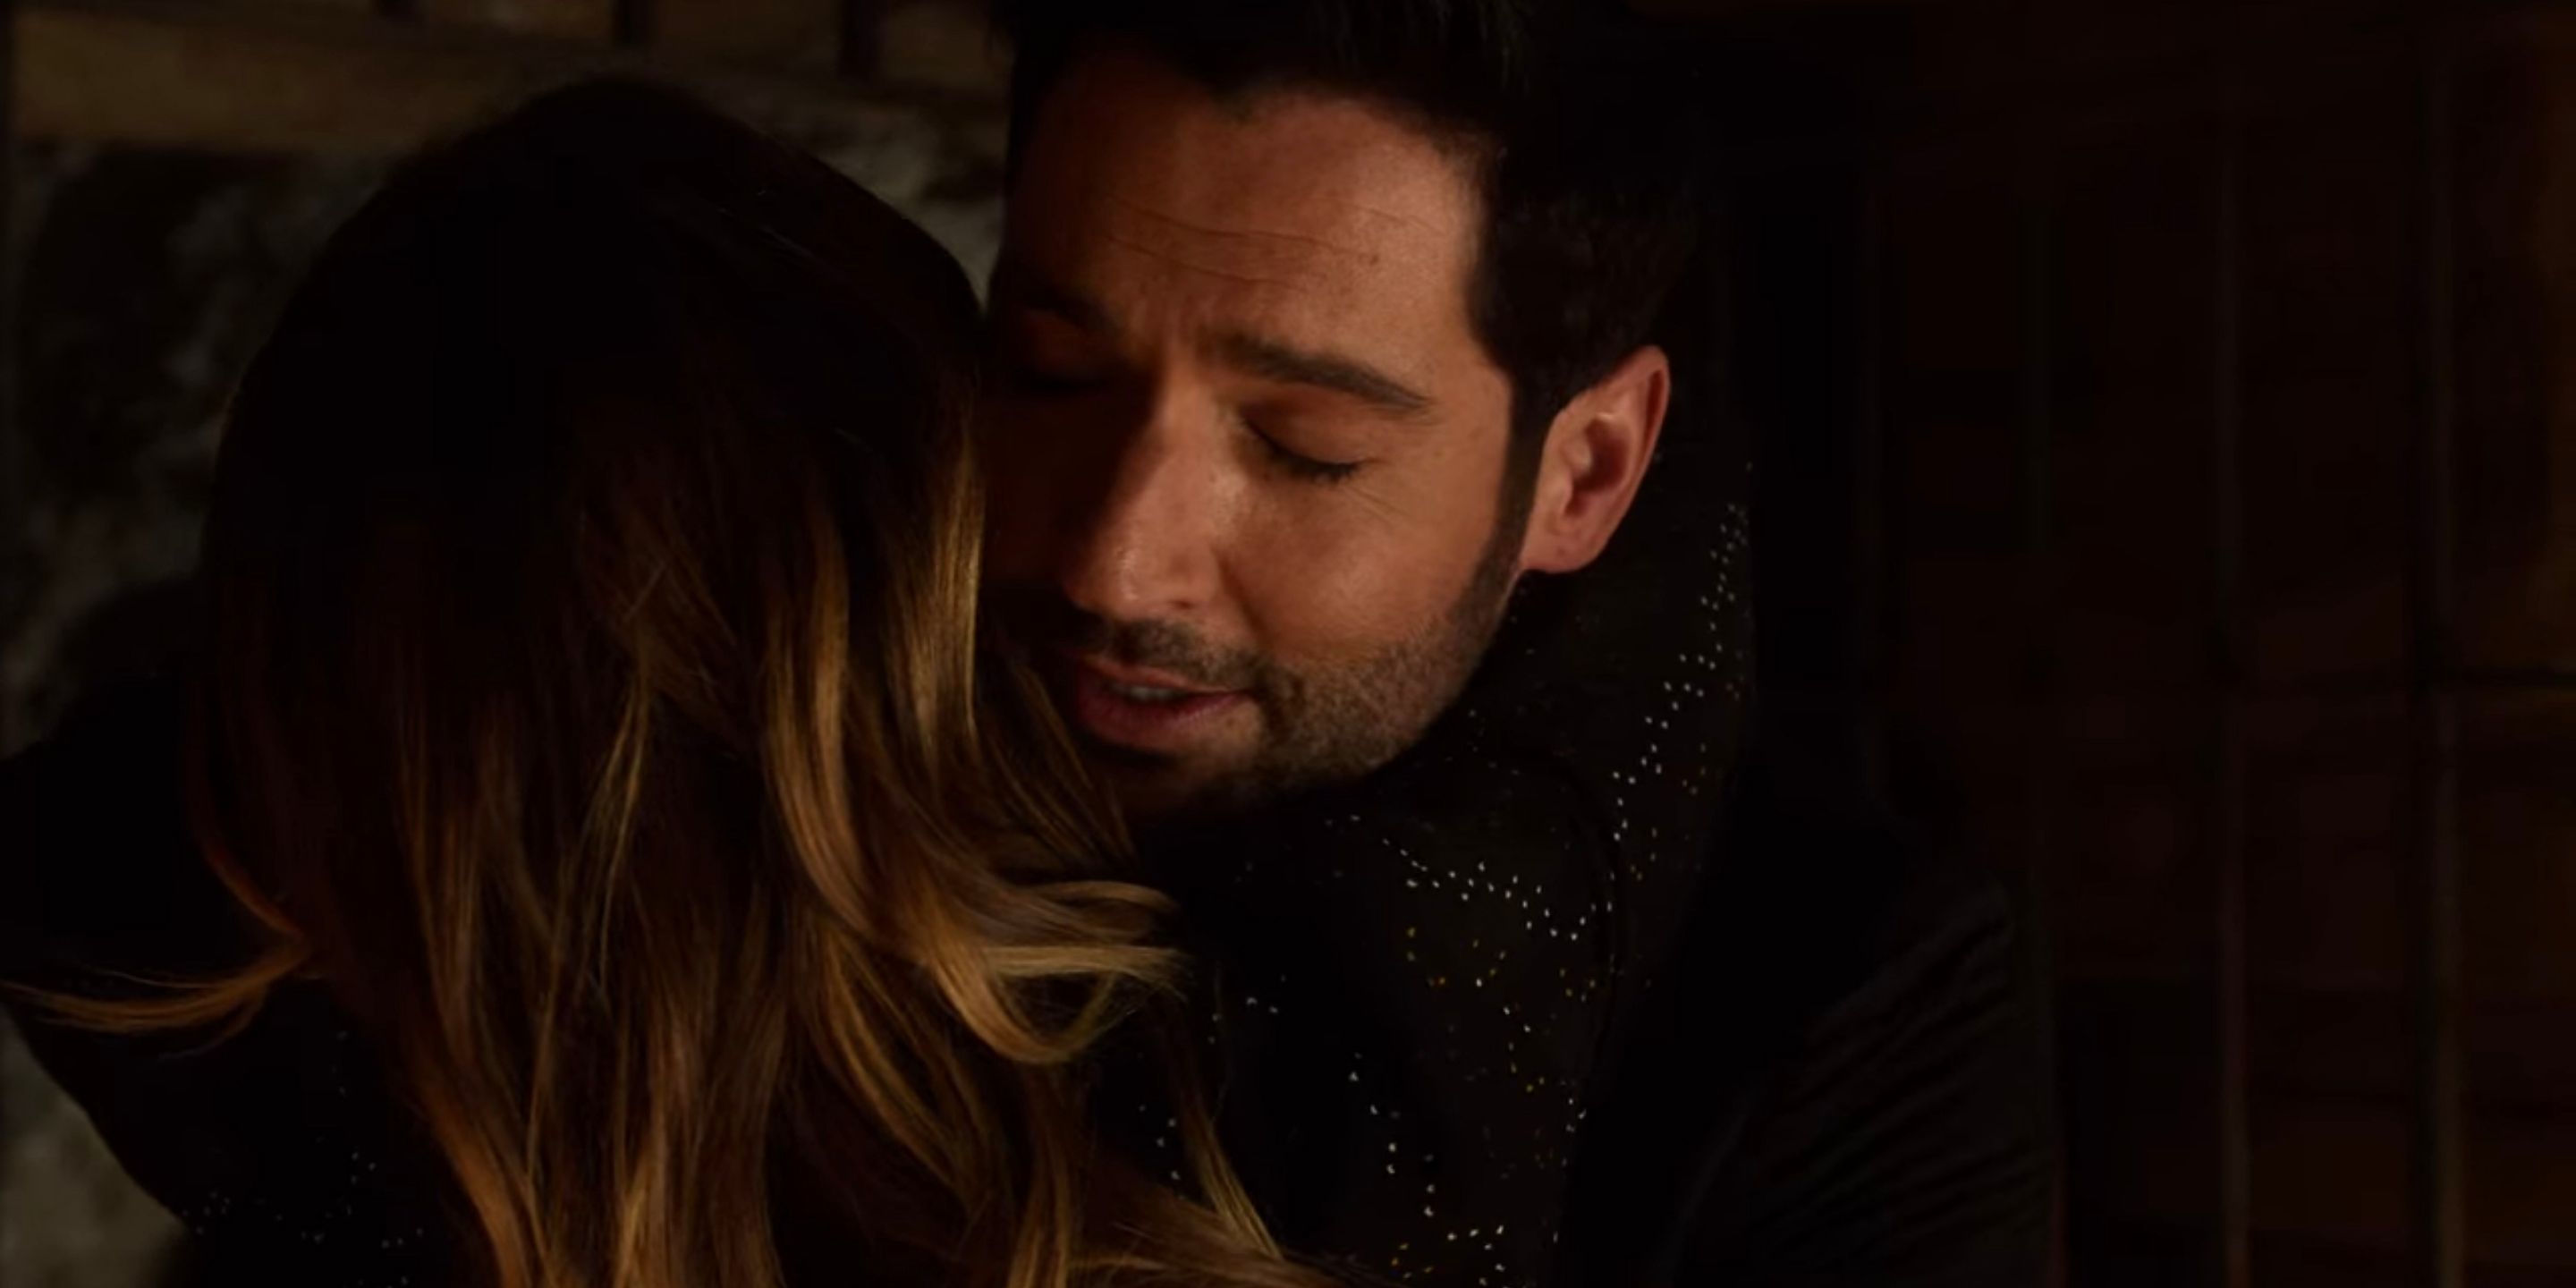 Lucifer rescues Chloe and they hug.